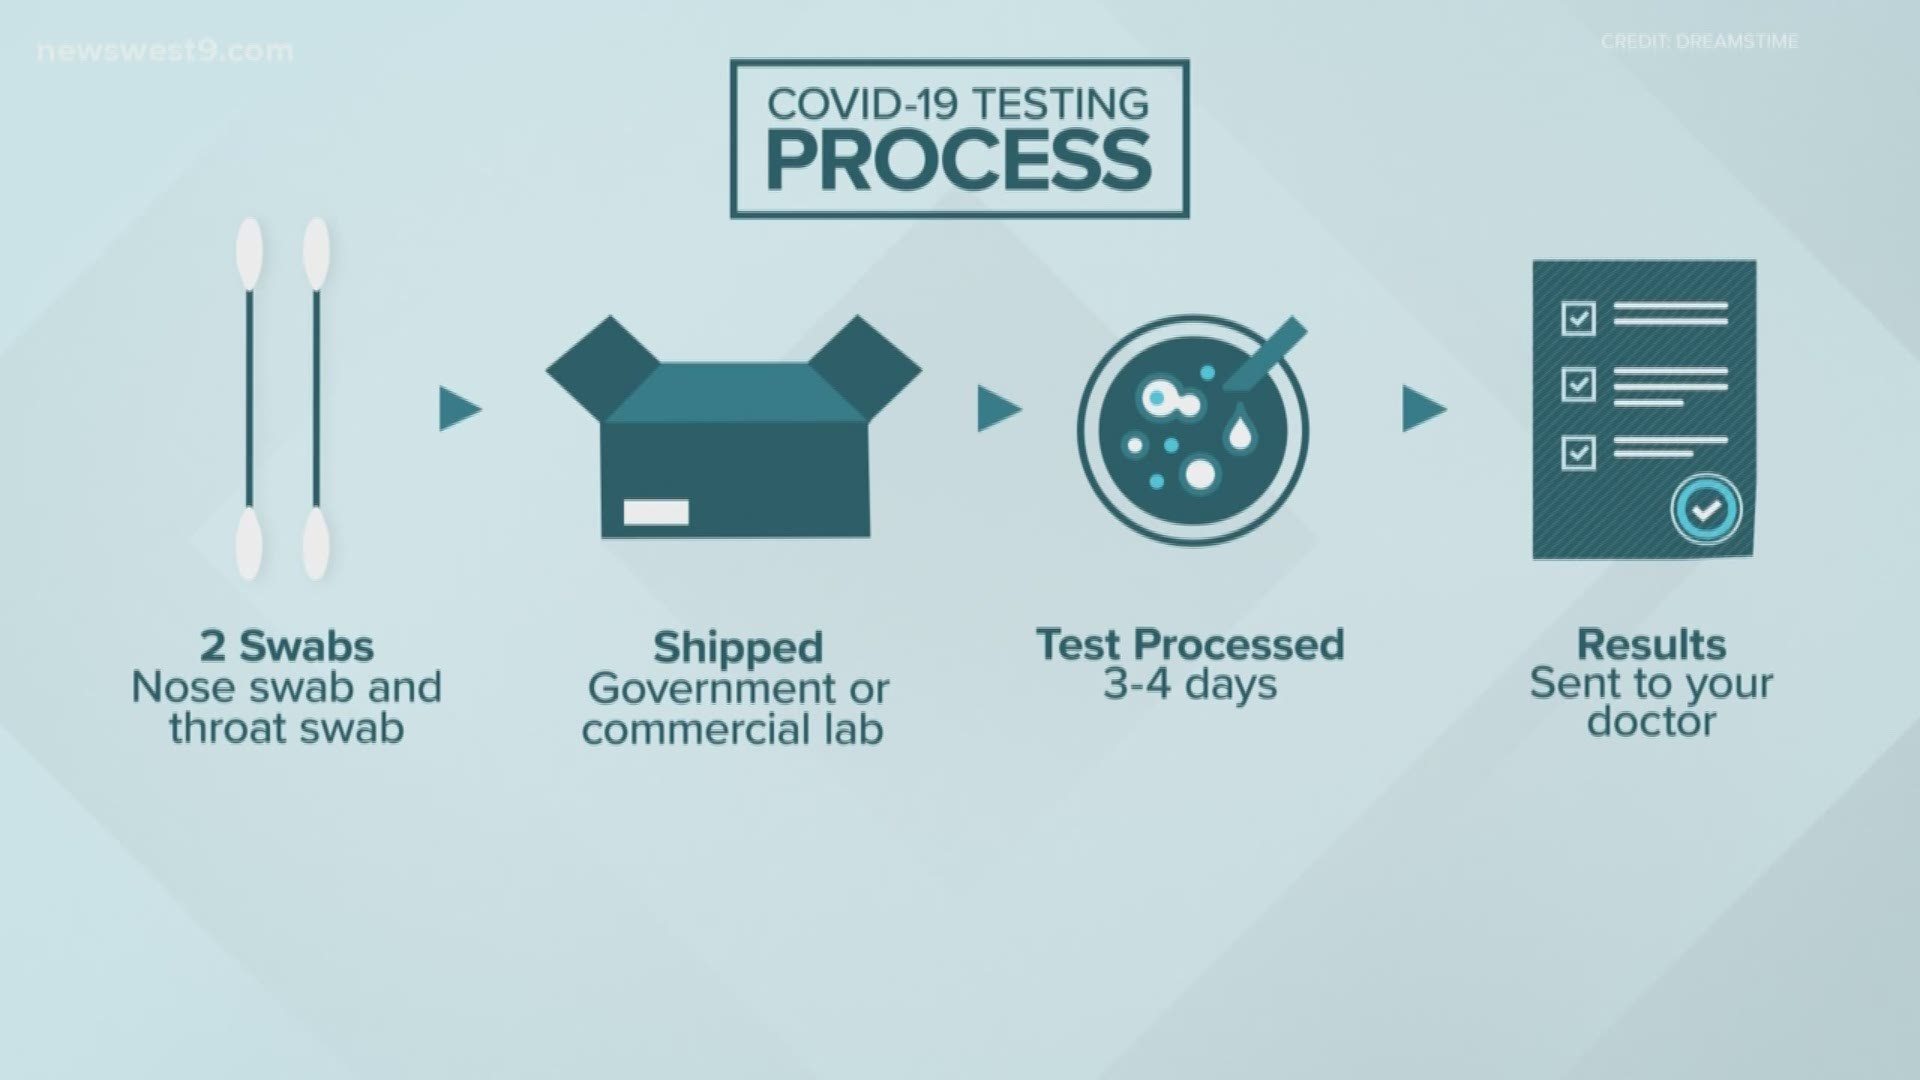 Swabs are shipped to a government lab where the test will take three to four days to process.